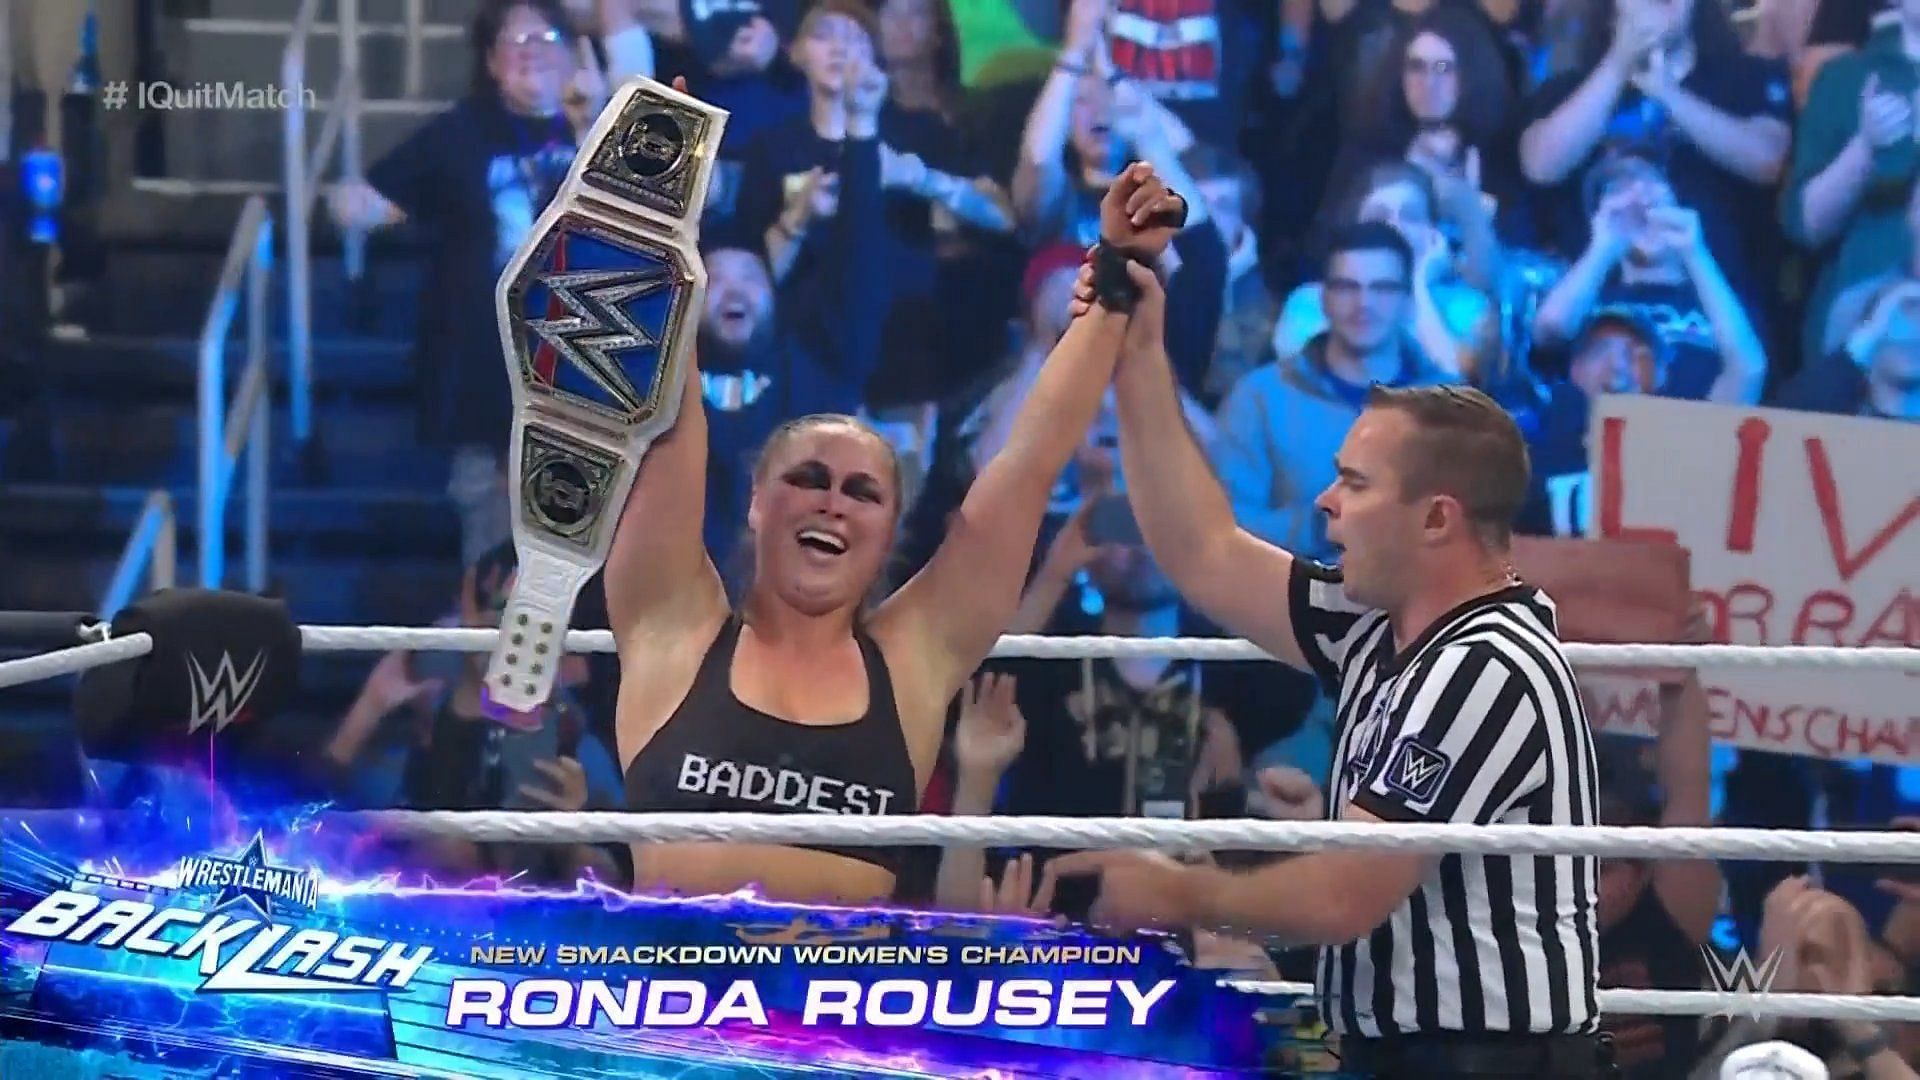 Ronda Rousey finds herself at the top of the mountain